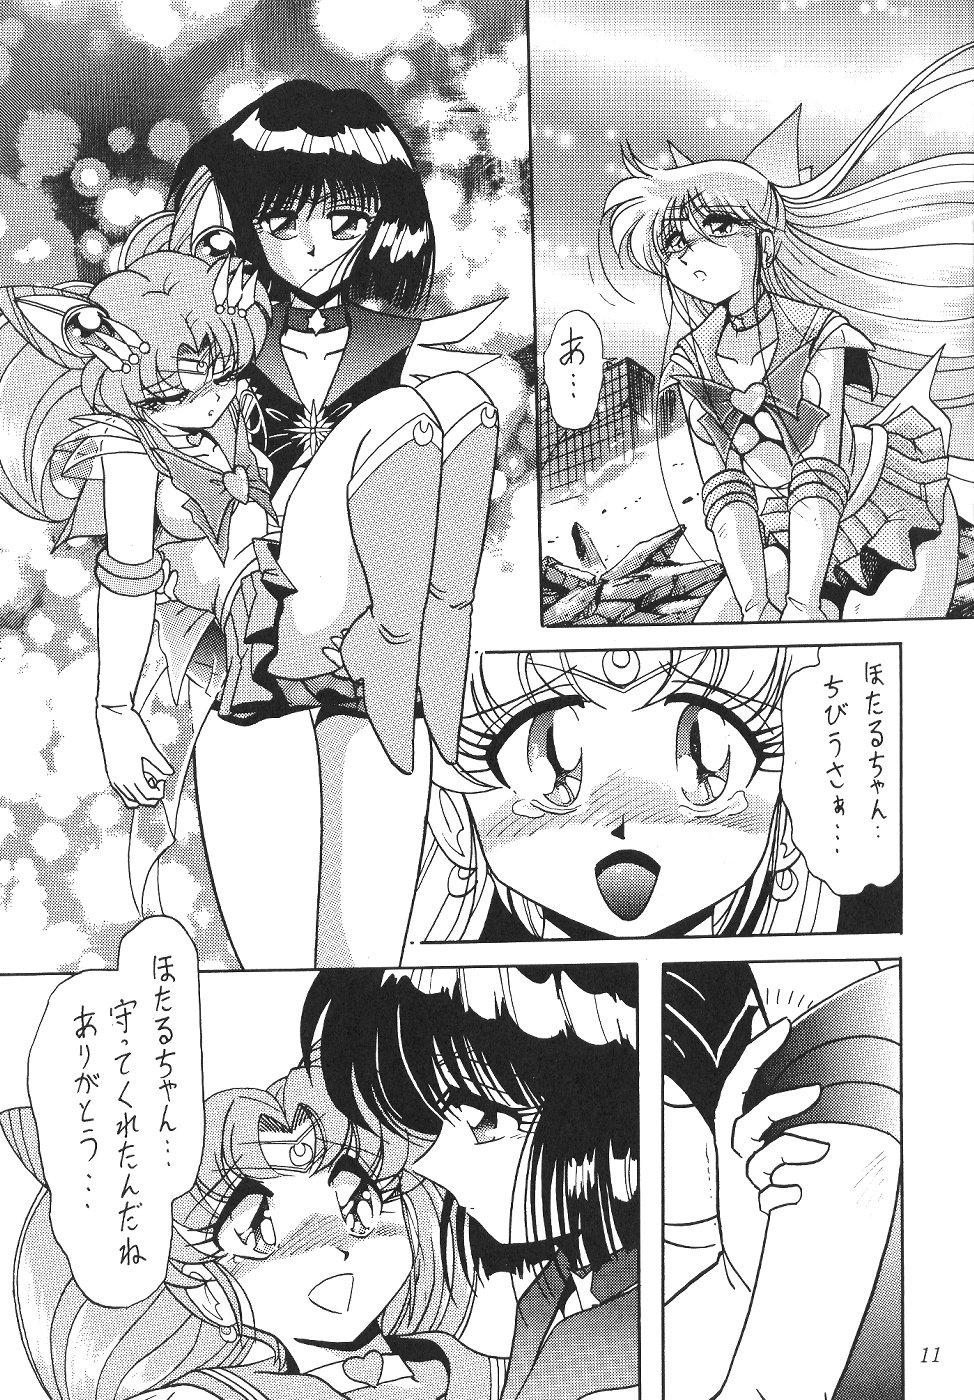 Self Silent Saturn 11 - Sailor moon Doctor - Page 11